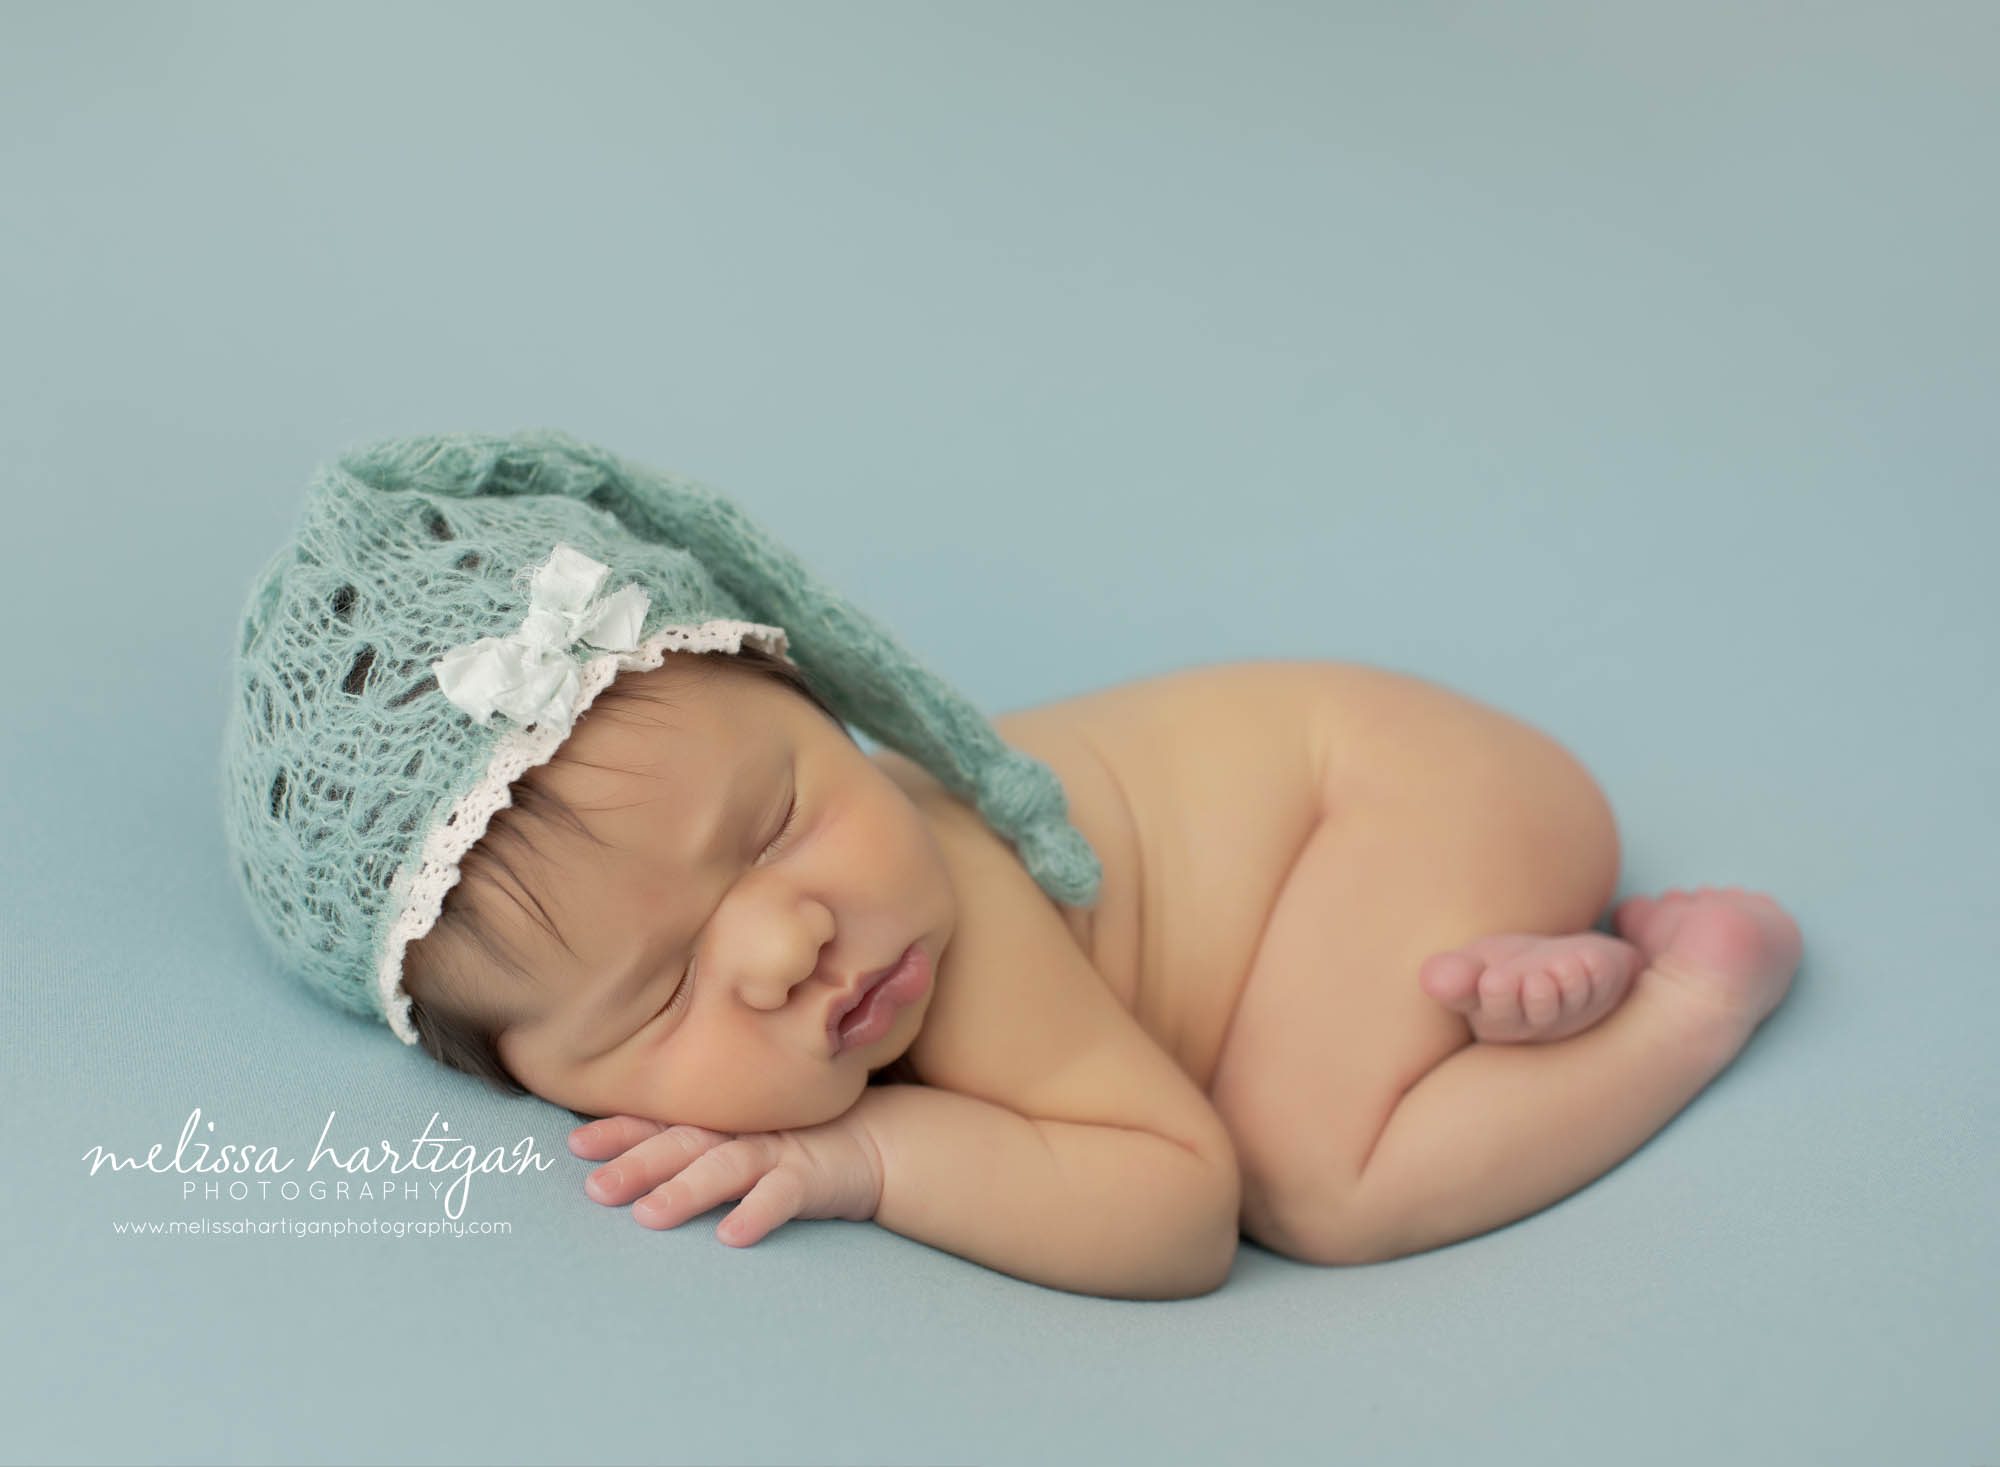 newborn baby girl posed on side wearing sea green knitted sleepy cap bonnet with bow